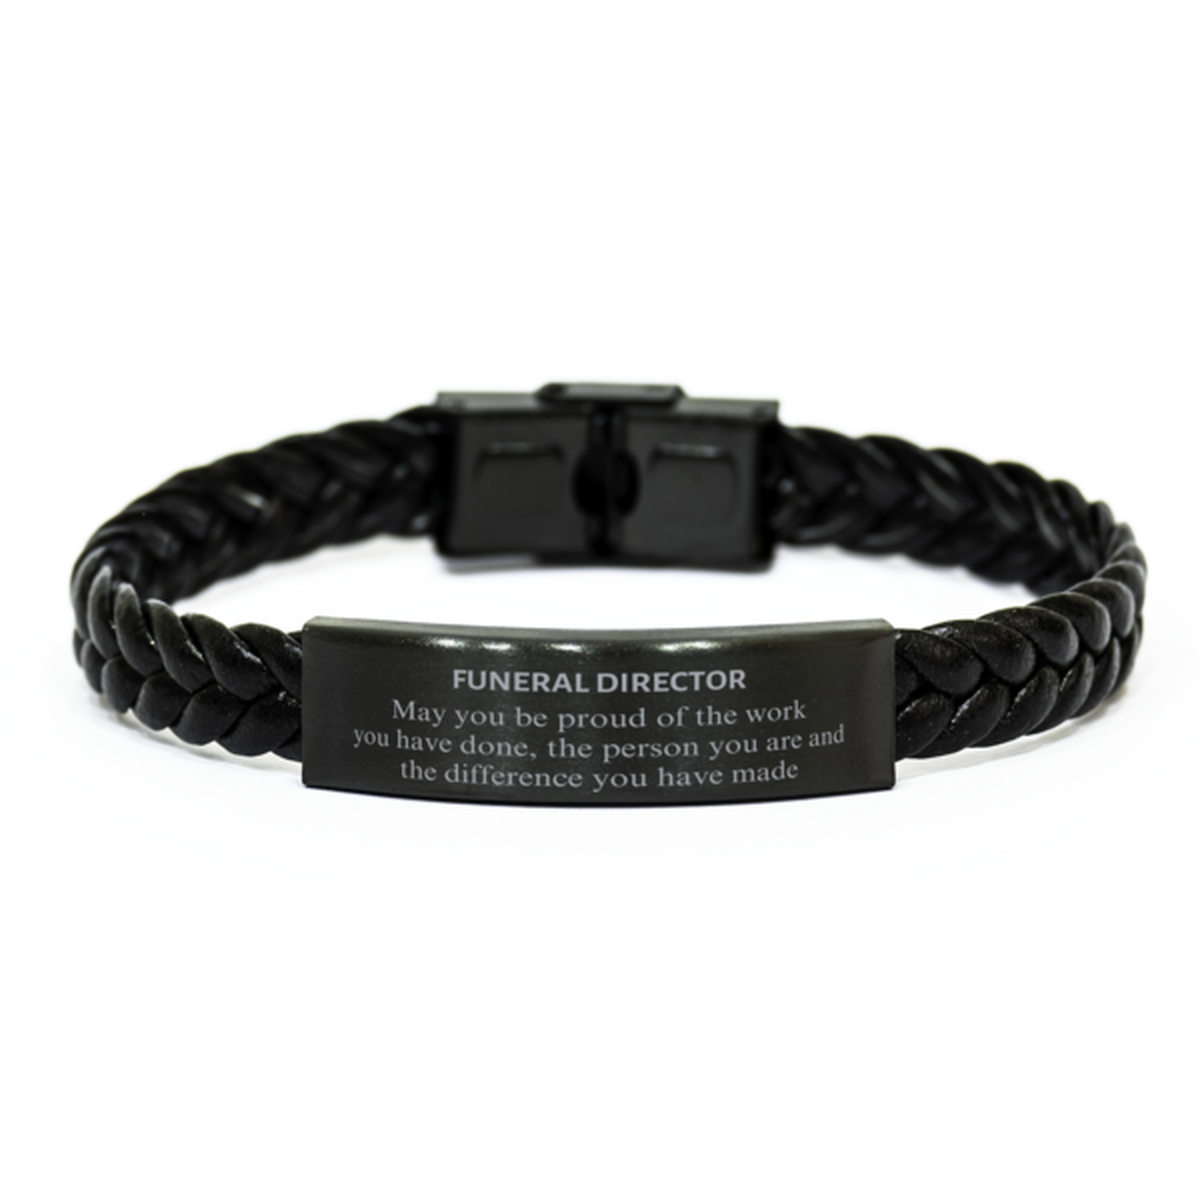 Funeral Director May you be proud of the work you have done, Retirement Funeral Director Braided Leather Bracelet for Colleague Appreciation Gifts Amazing for Funeral Director